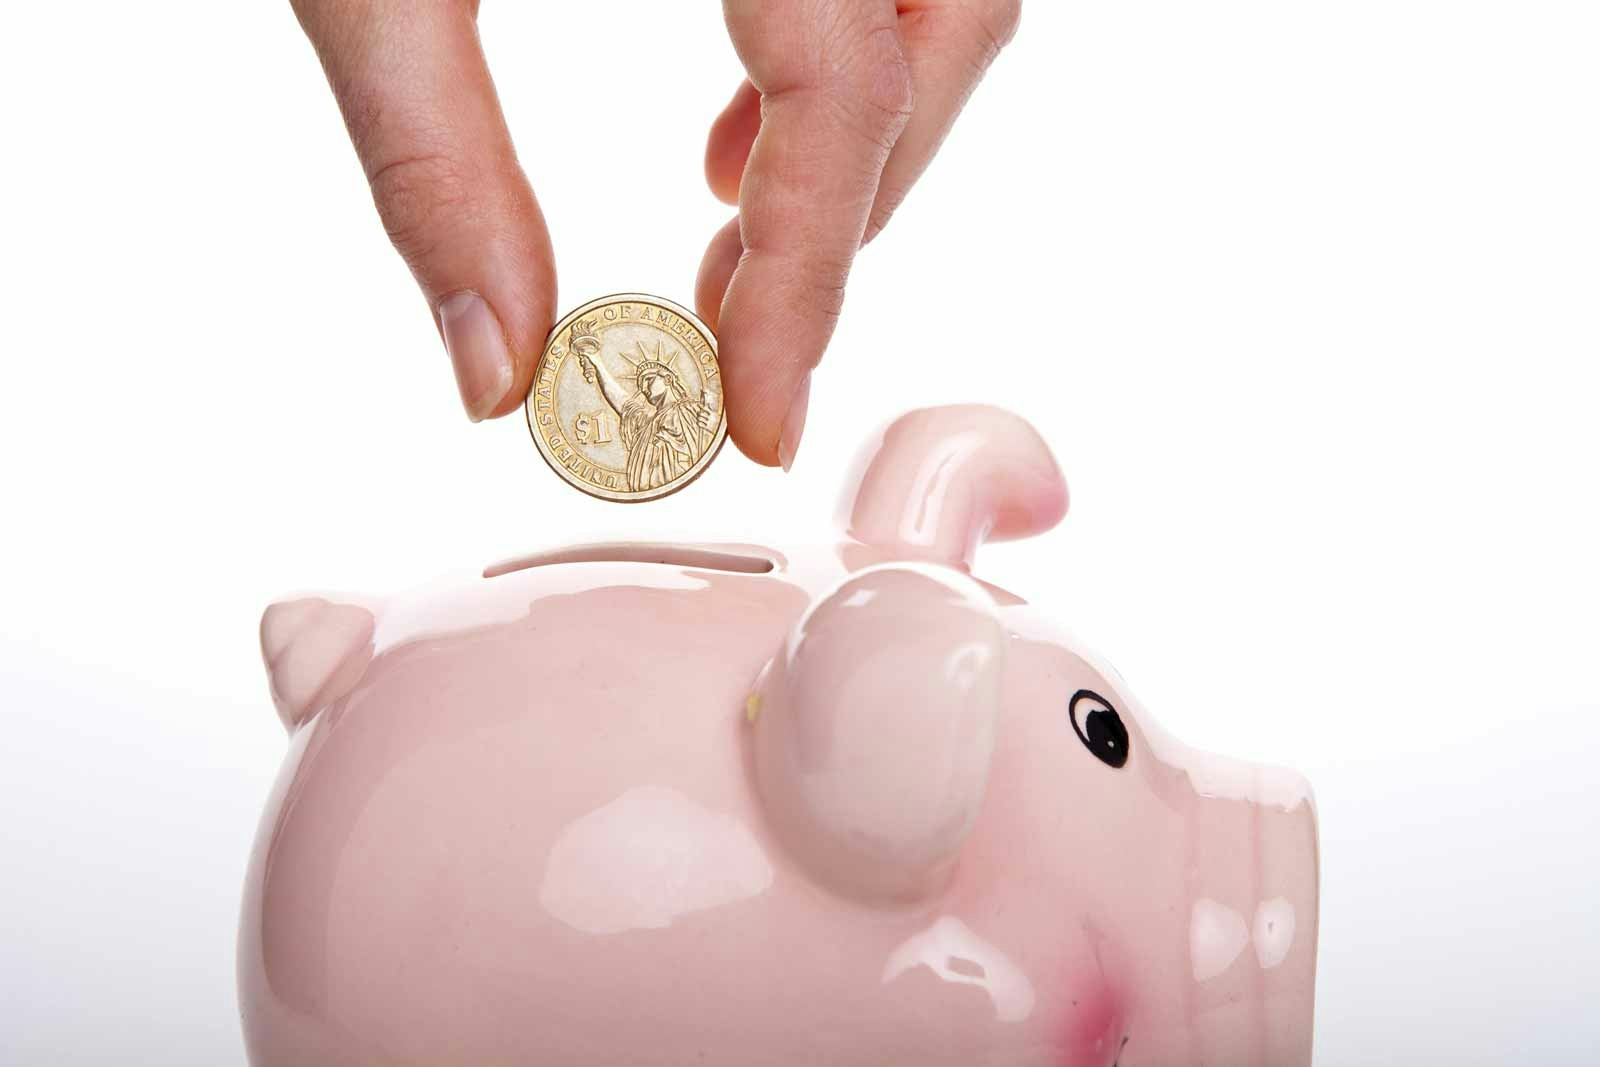 person putting a coin in a piggy bank